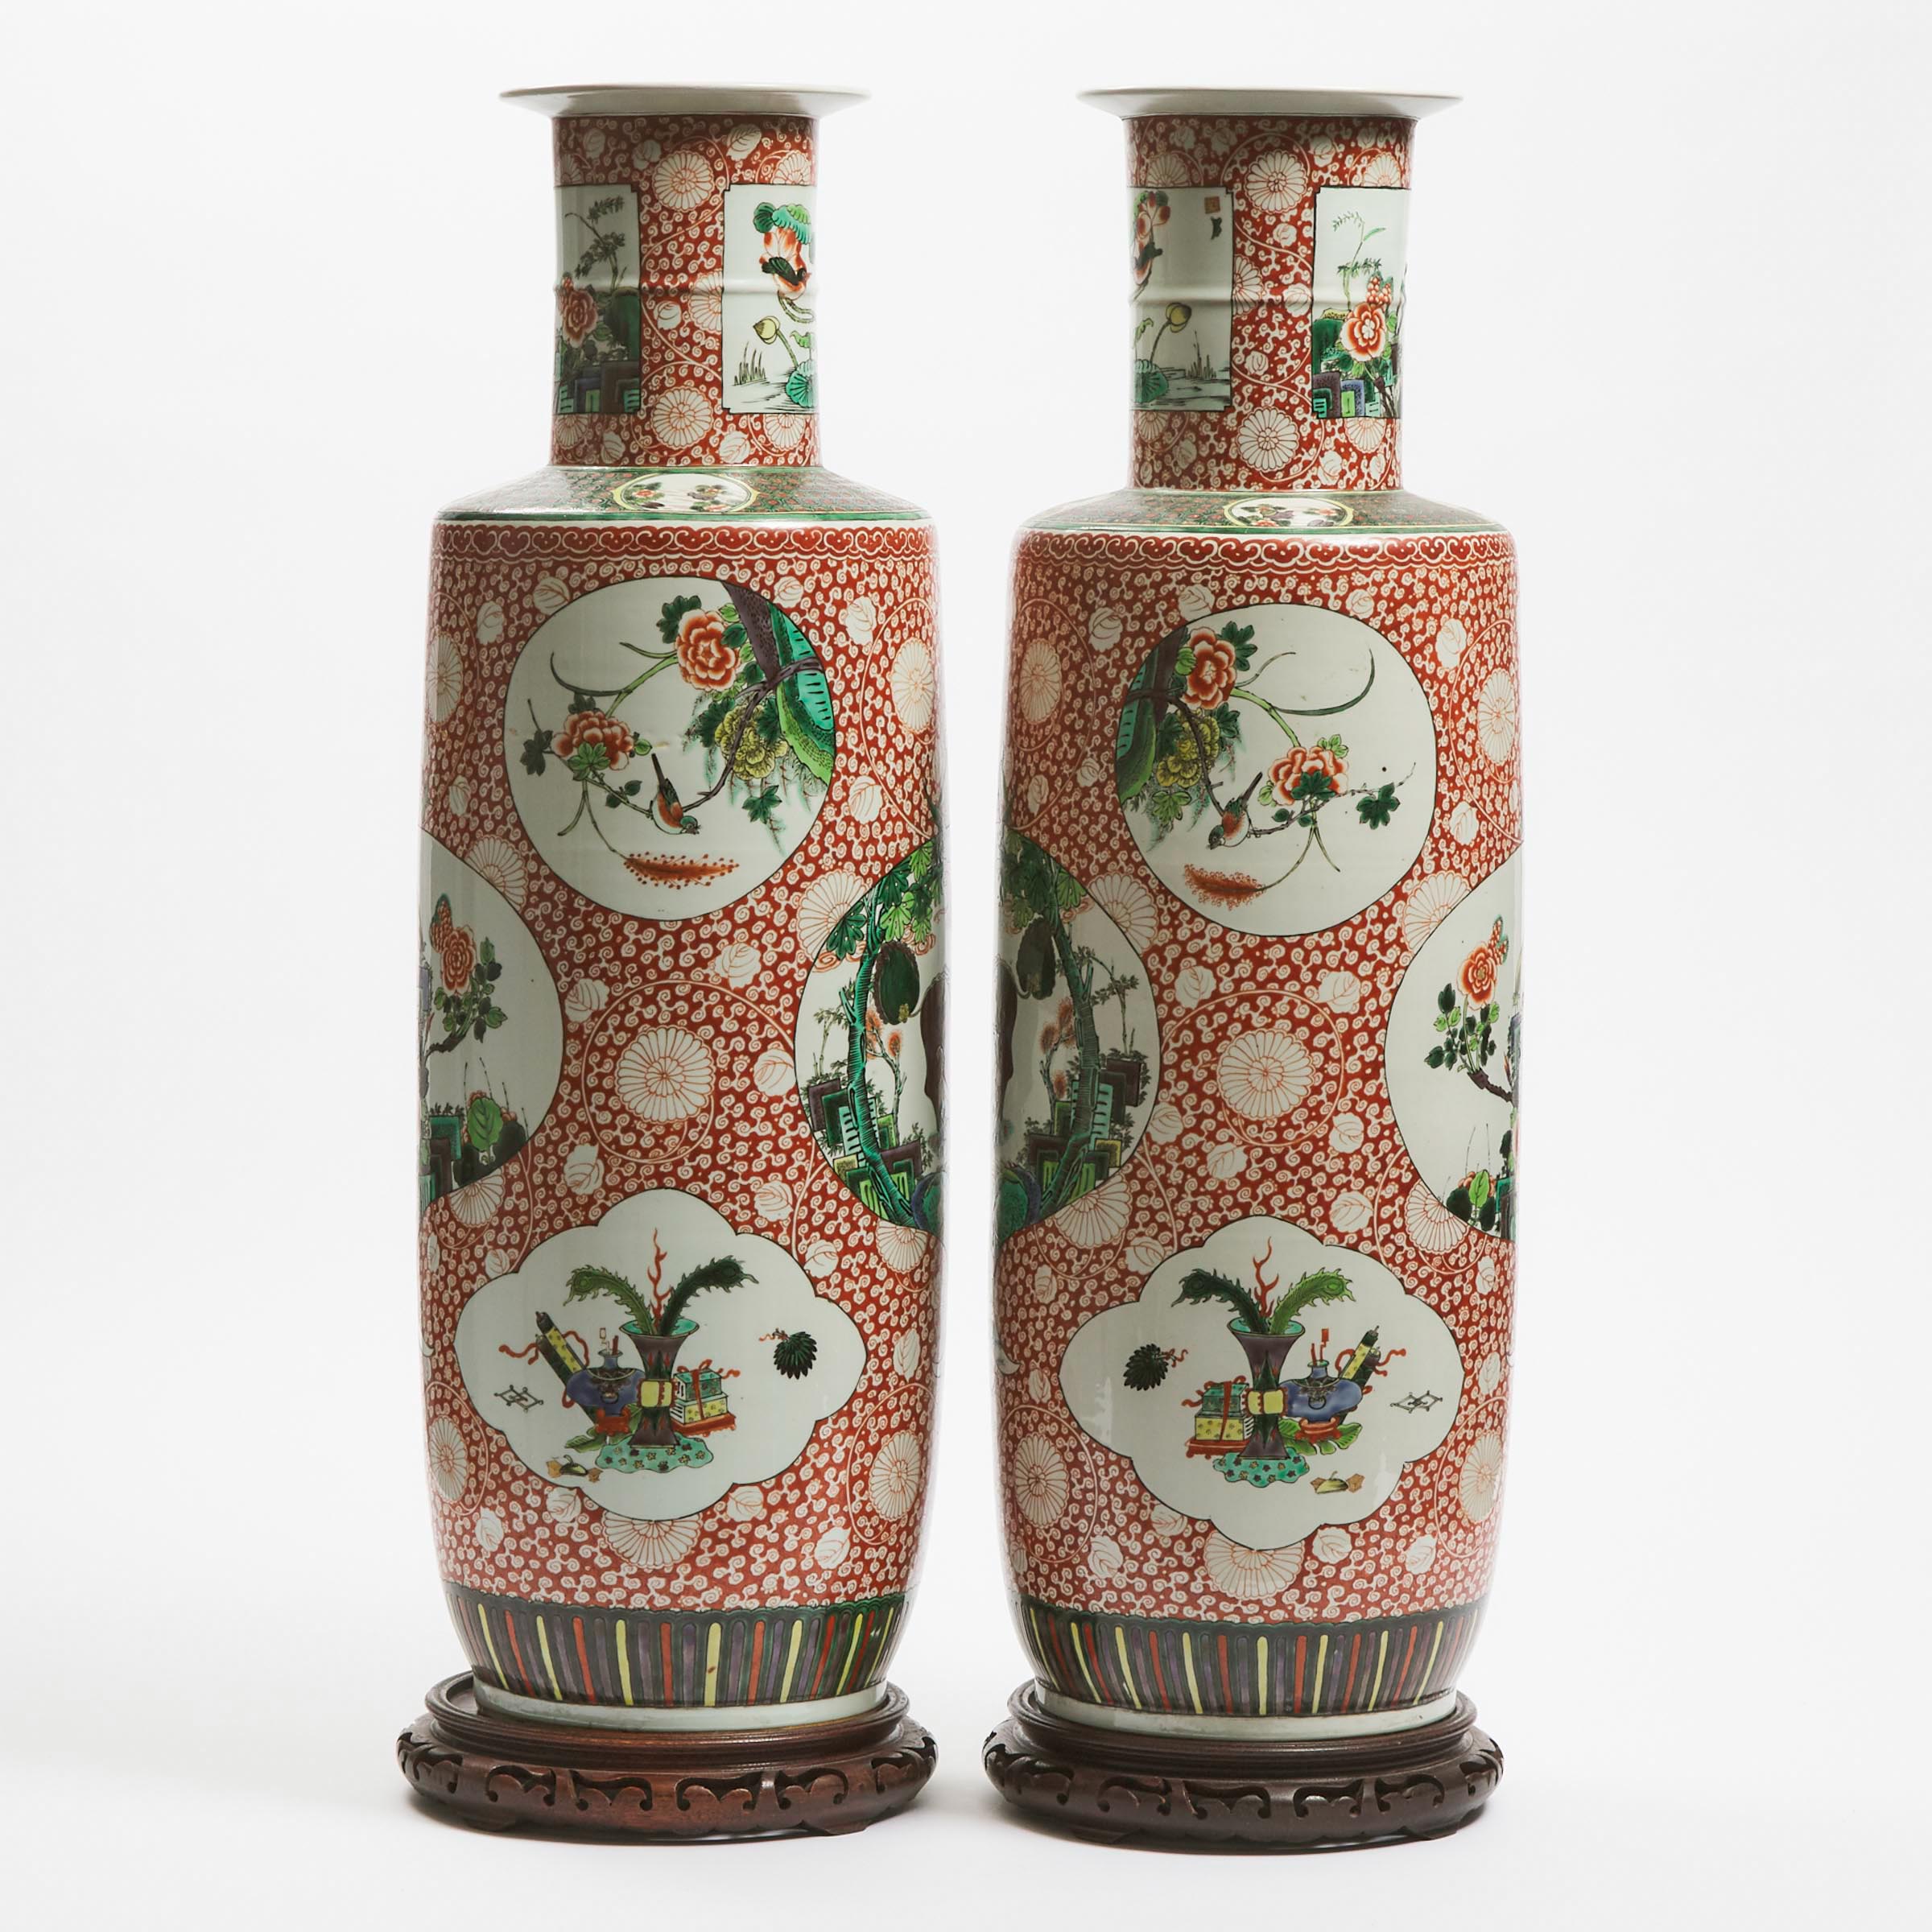 A Pair of Large Famille Verte and Iron-Red Decorated Rouleau Vases, Late 19th/Early 20th Century